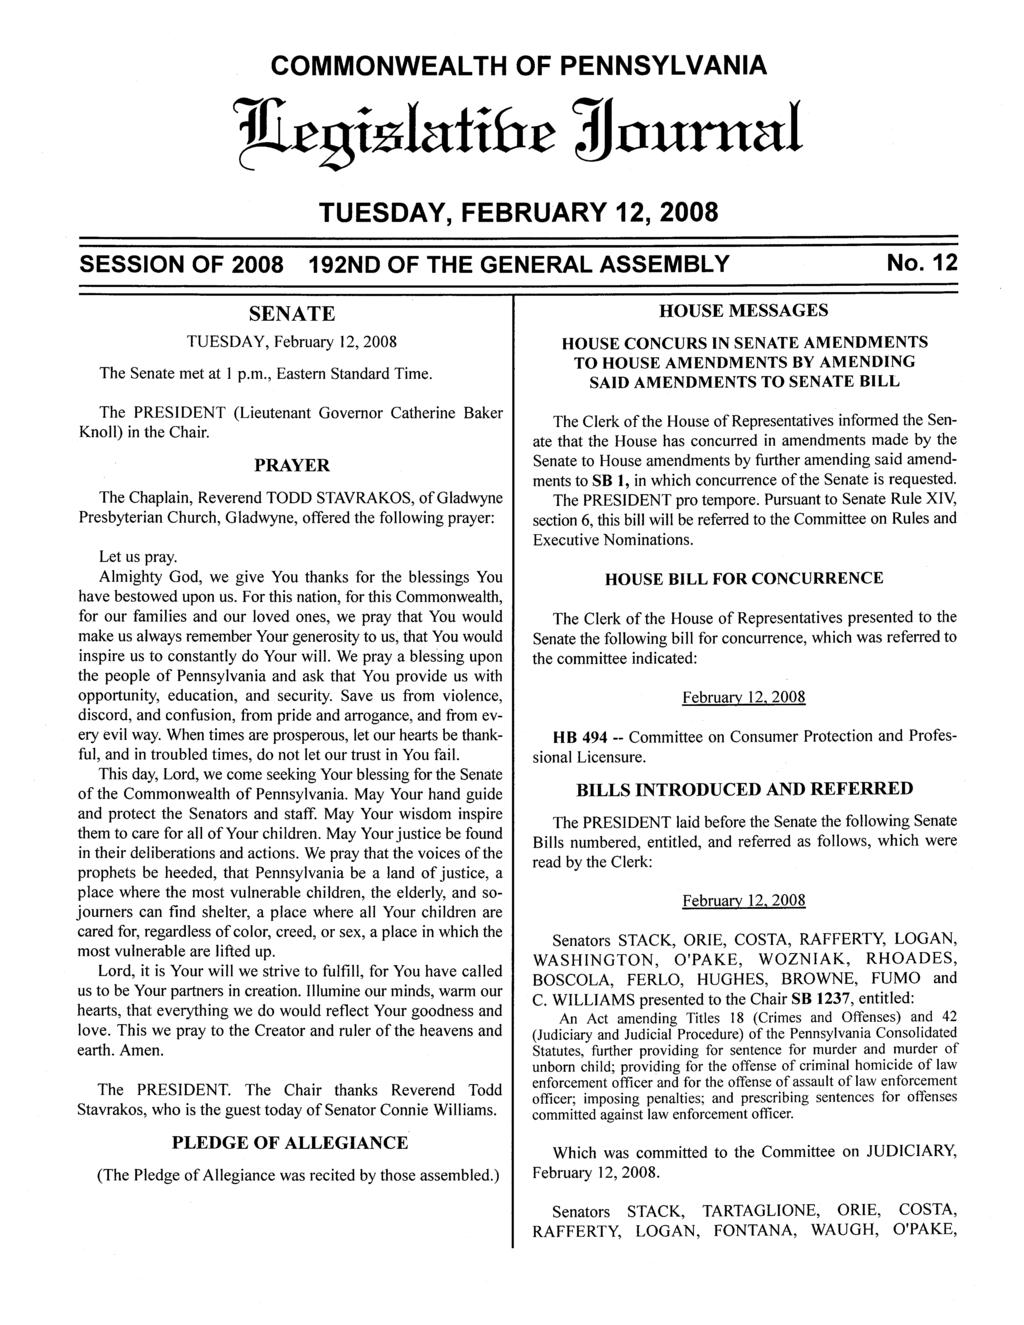 COMMONWEALTH OF PENNSYLVANIA r j izlathrr 3J nuntat TUESDAY, FEBRUARY 12, 2008 SESSION OF 2008 192ND OF THE GENERAL ASSEMBLY No. 12 SENATE TUESDAY, February 12, 2008 The Senate me